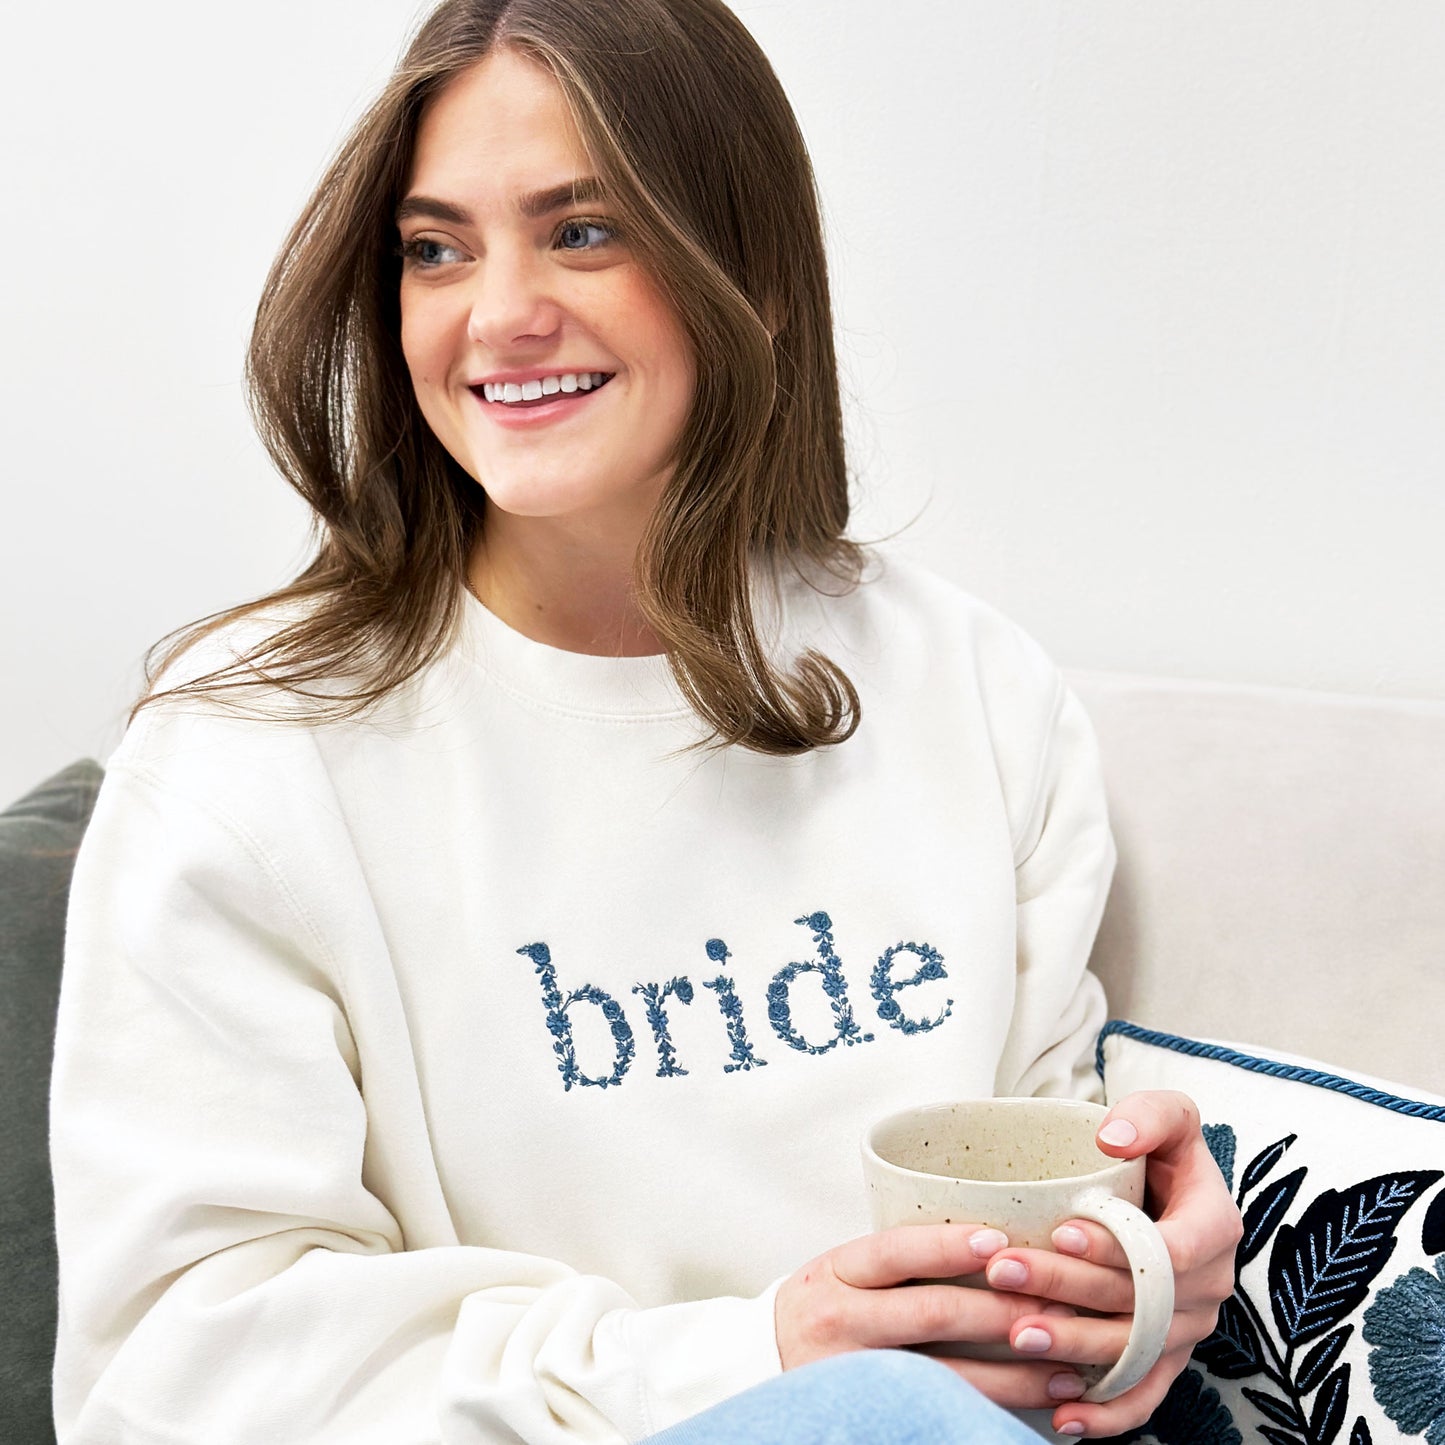 Young woman drinking coffee on a coach modeling a white crewneck sweatshirt that says bride in lowercase blue floral lettering embroidered across the chest